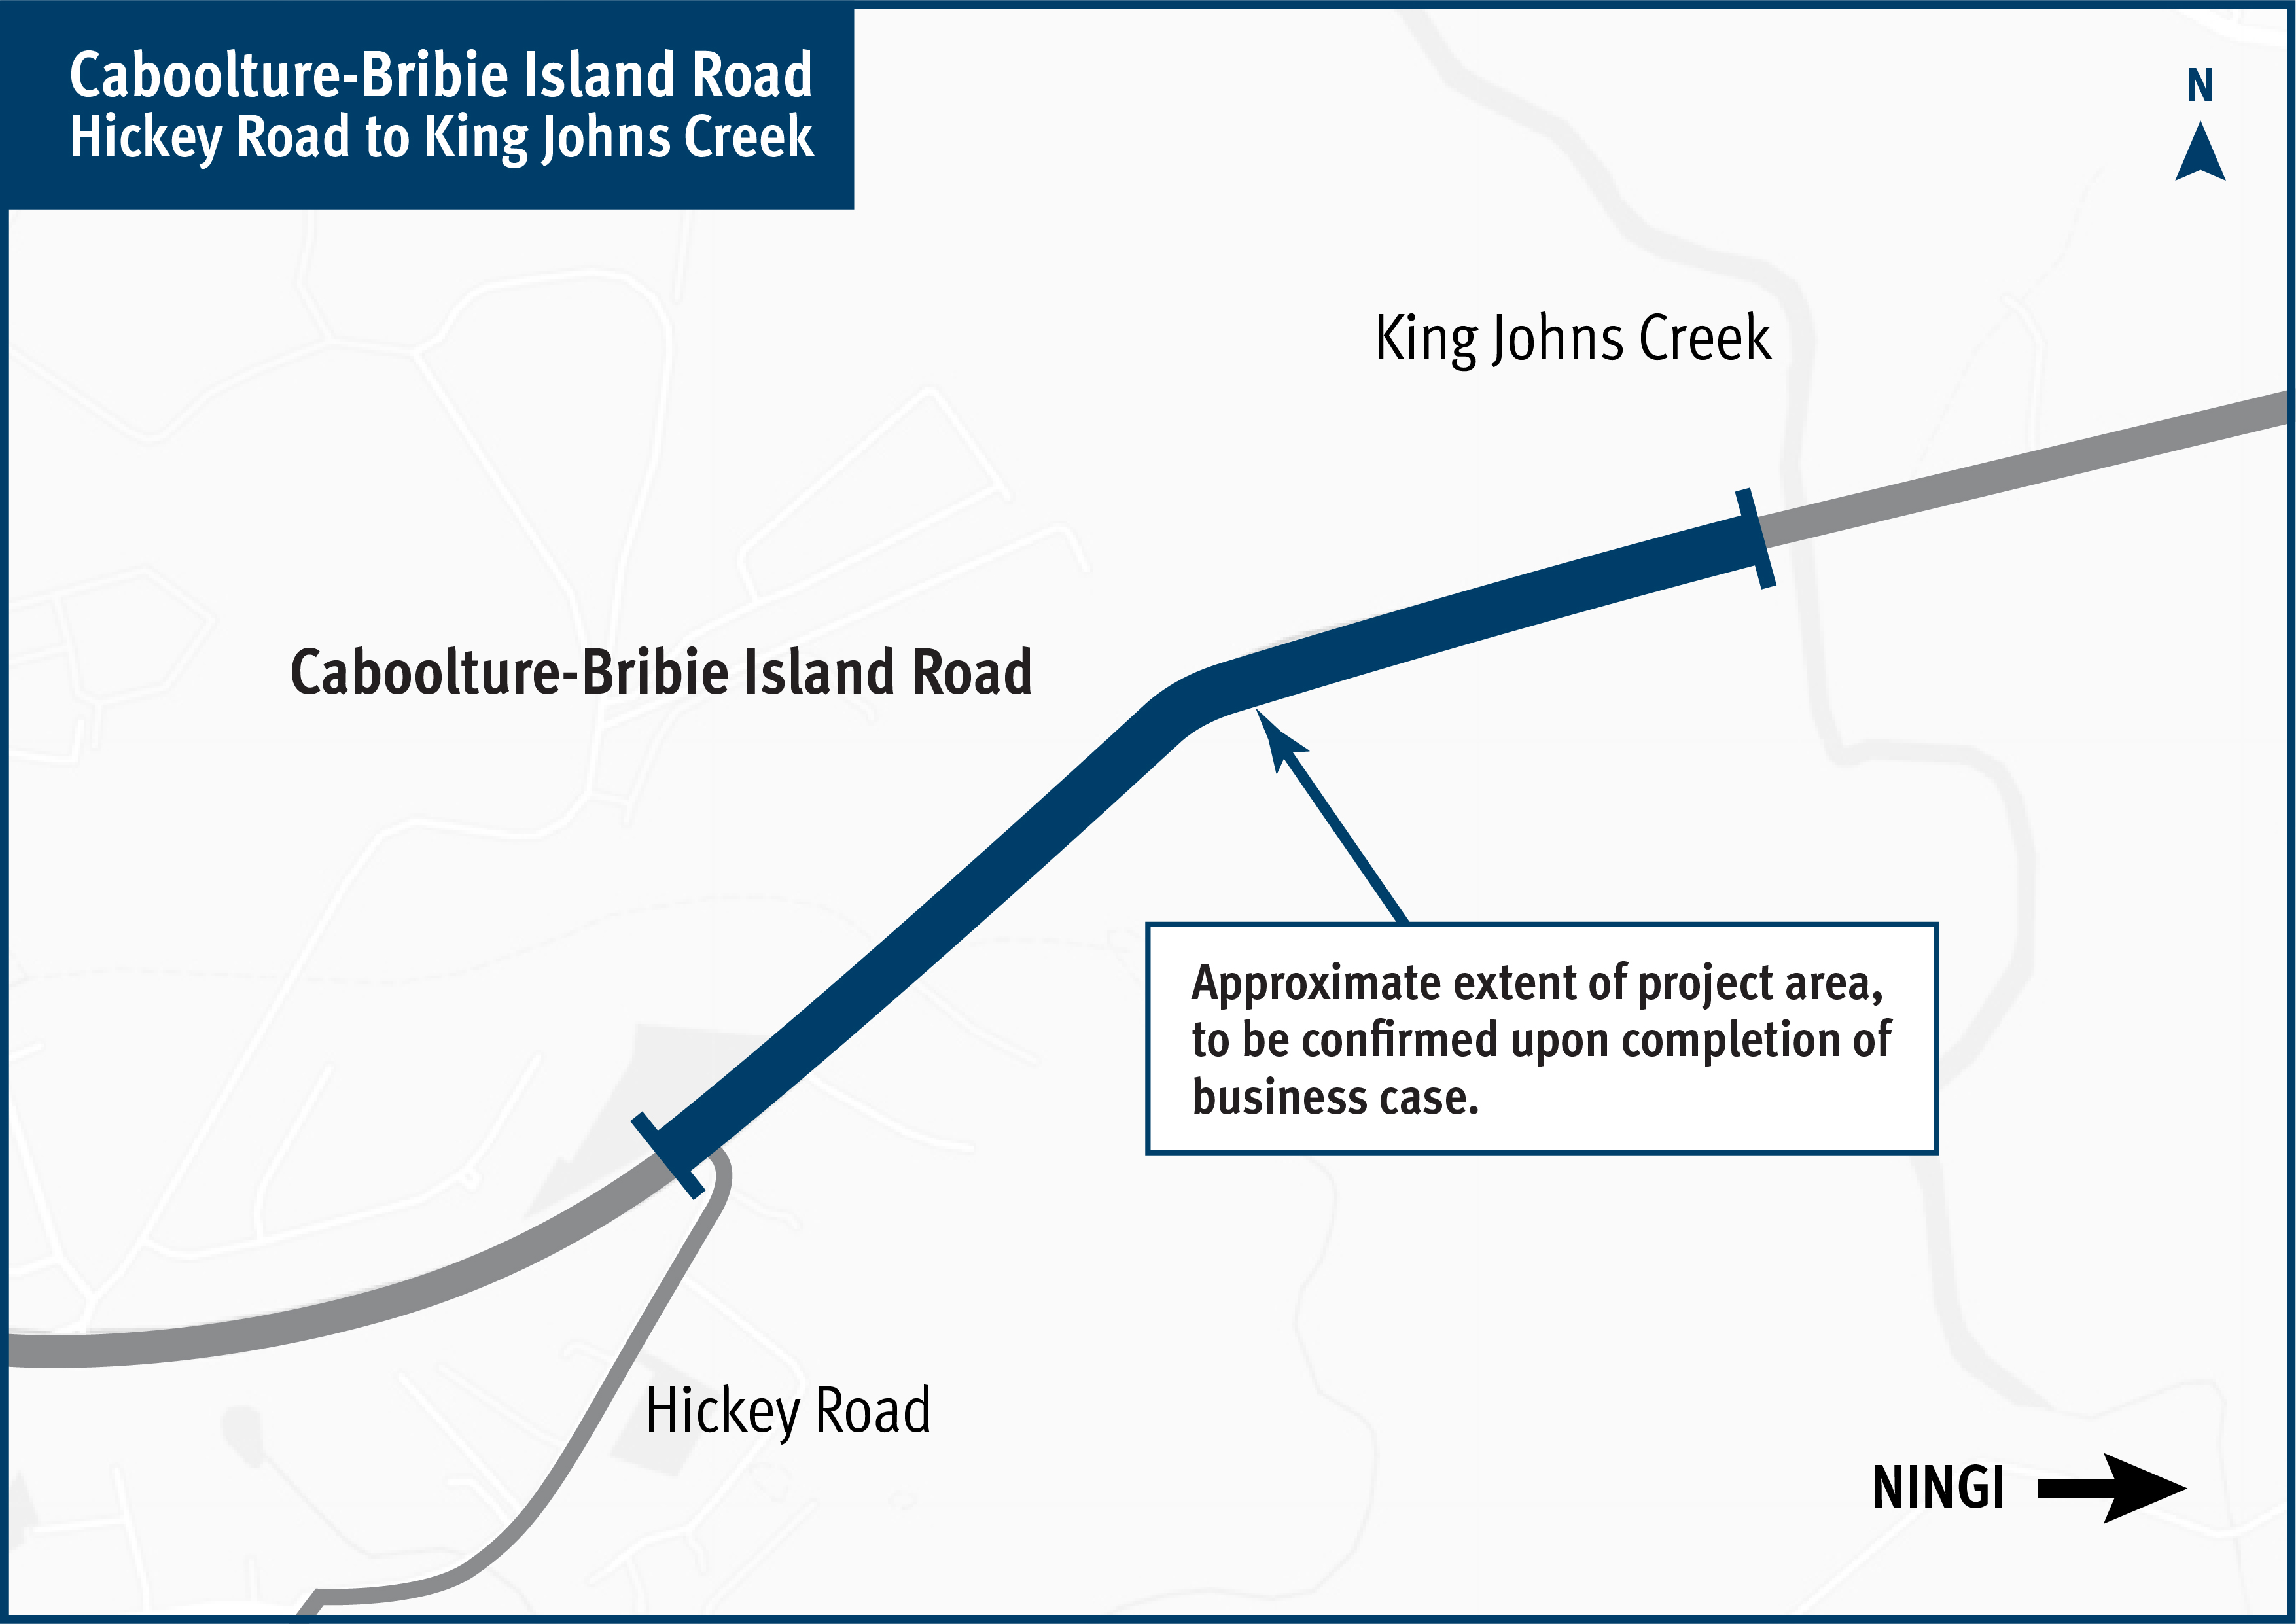 Map showing Caboolture-Bribie Island Road, between Hickey Road and King Johns Creek to indicate scope of the project. 